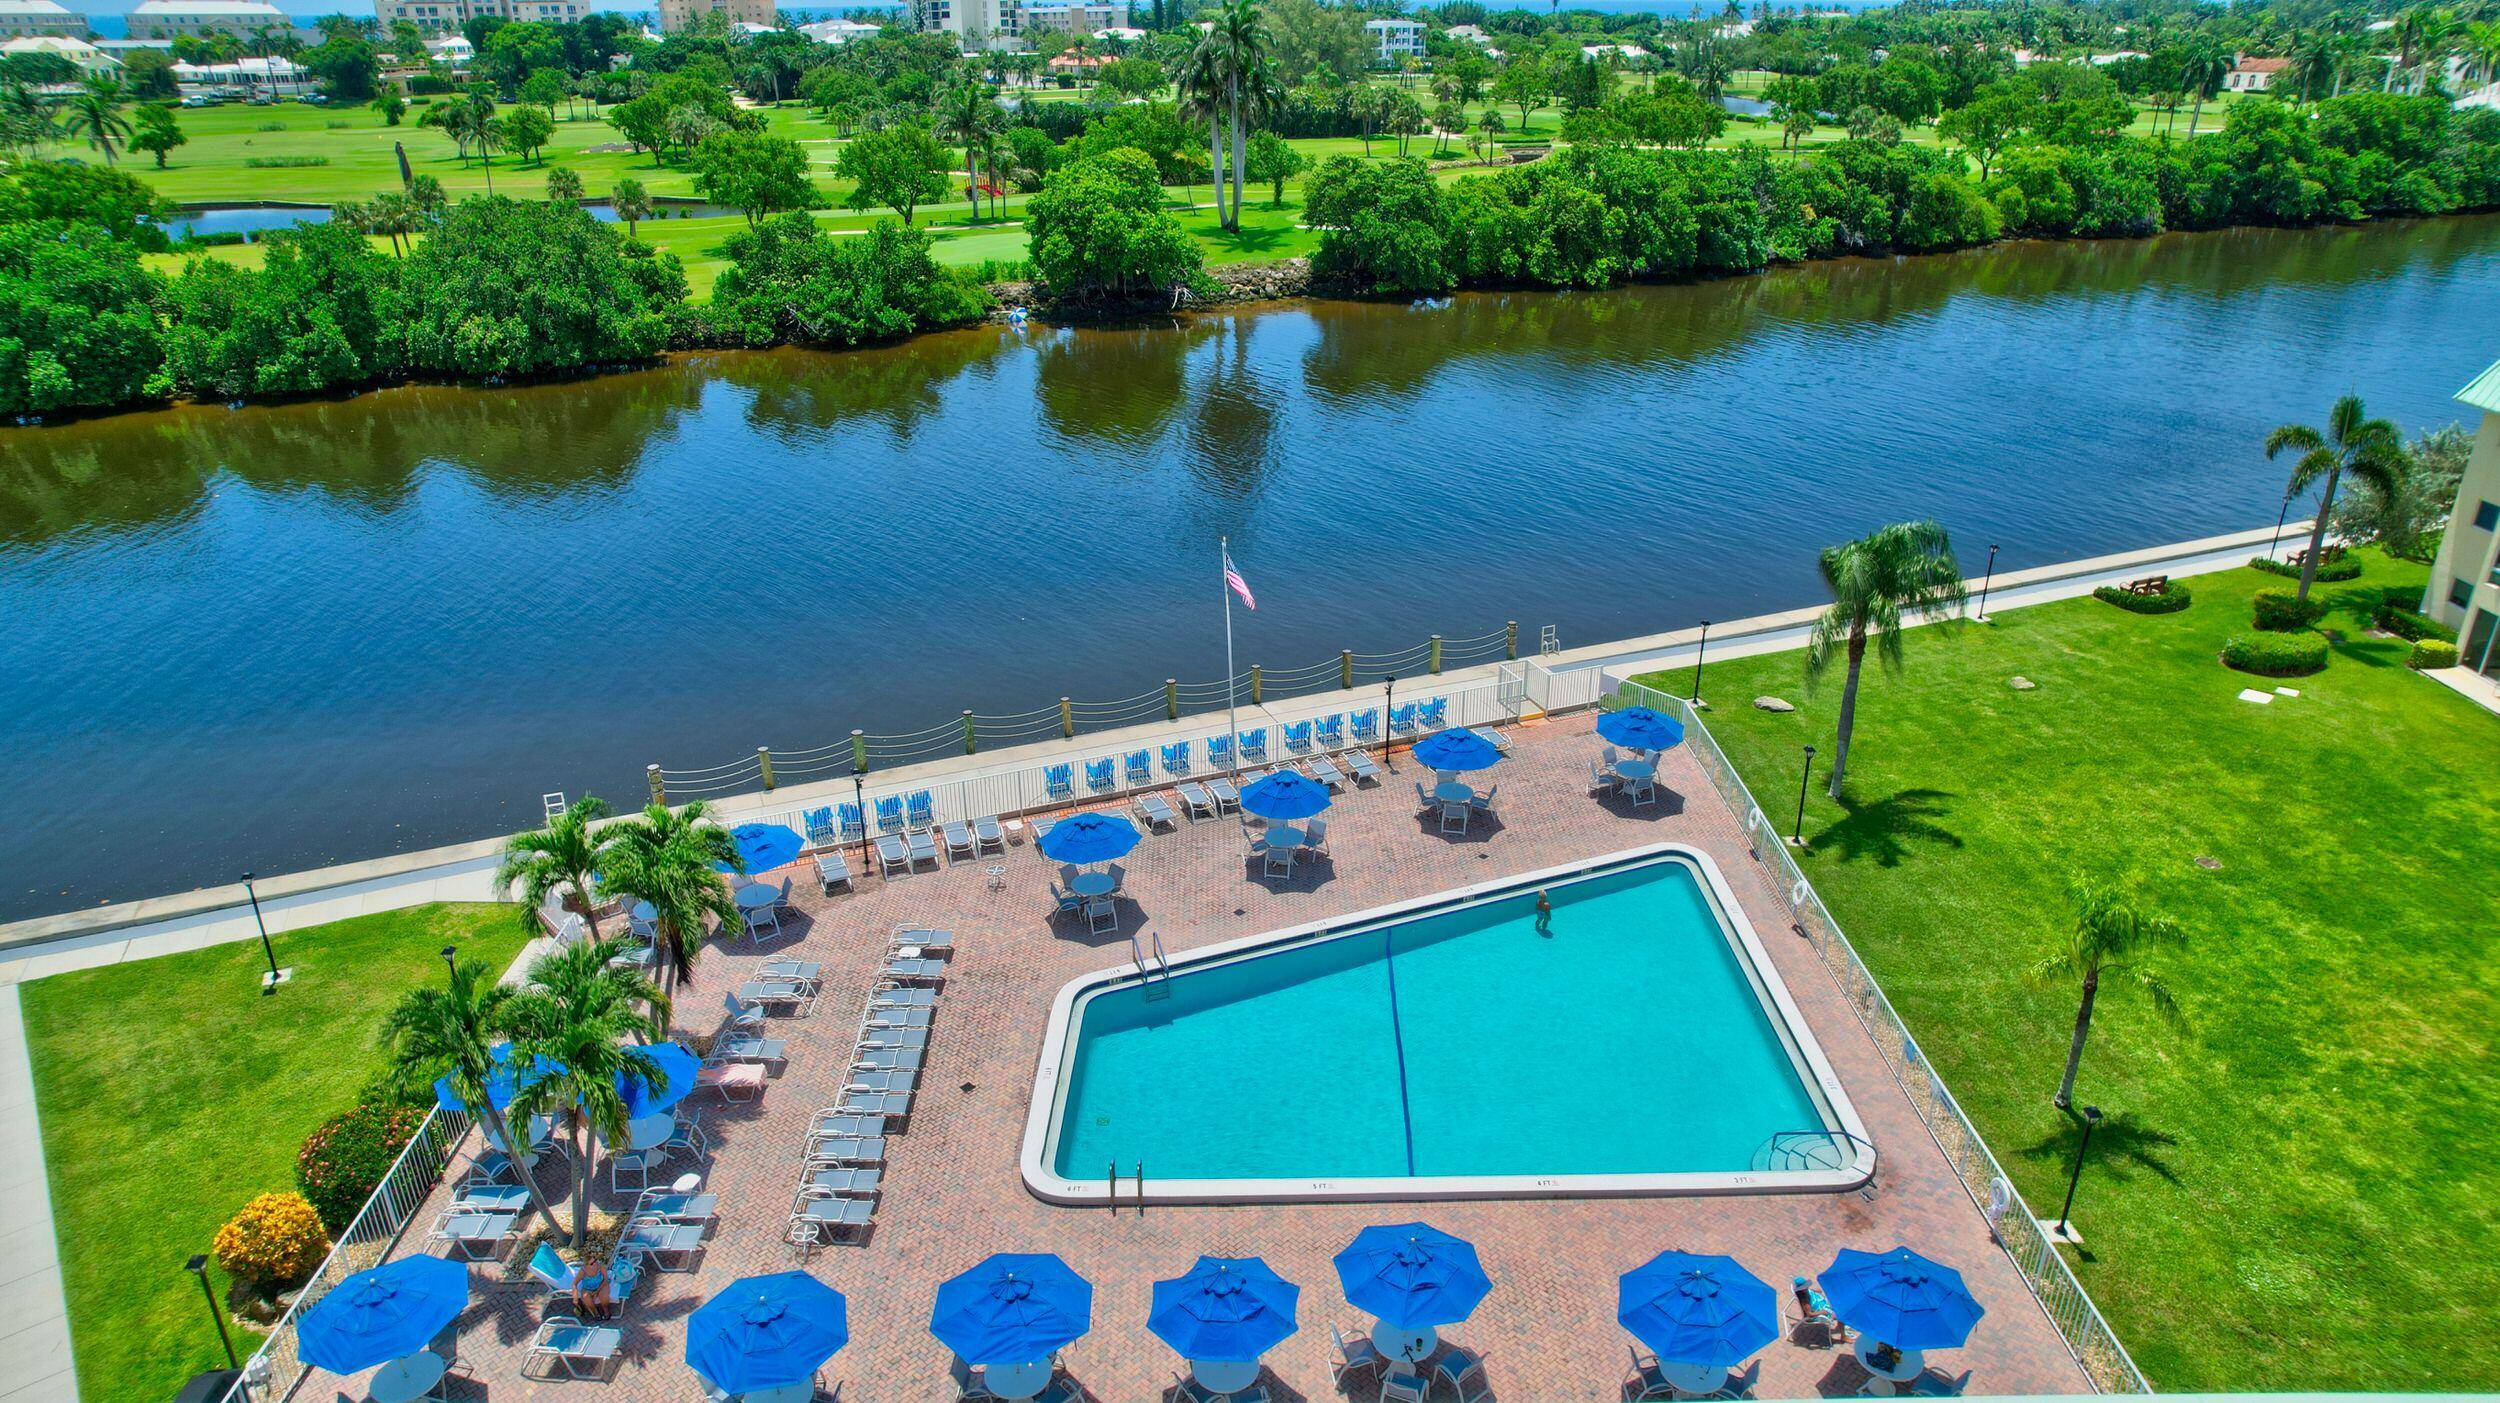 This stunning 2 bedroom, 2 bathroom ground floor corner Beautifully Furnished Turnkey condo is located in a resort style Intracoastal community.